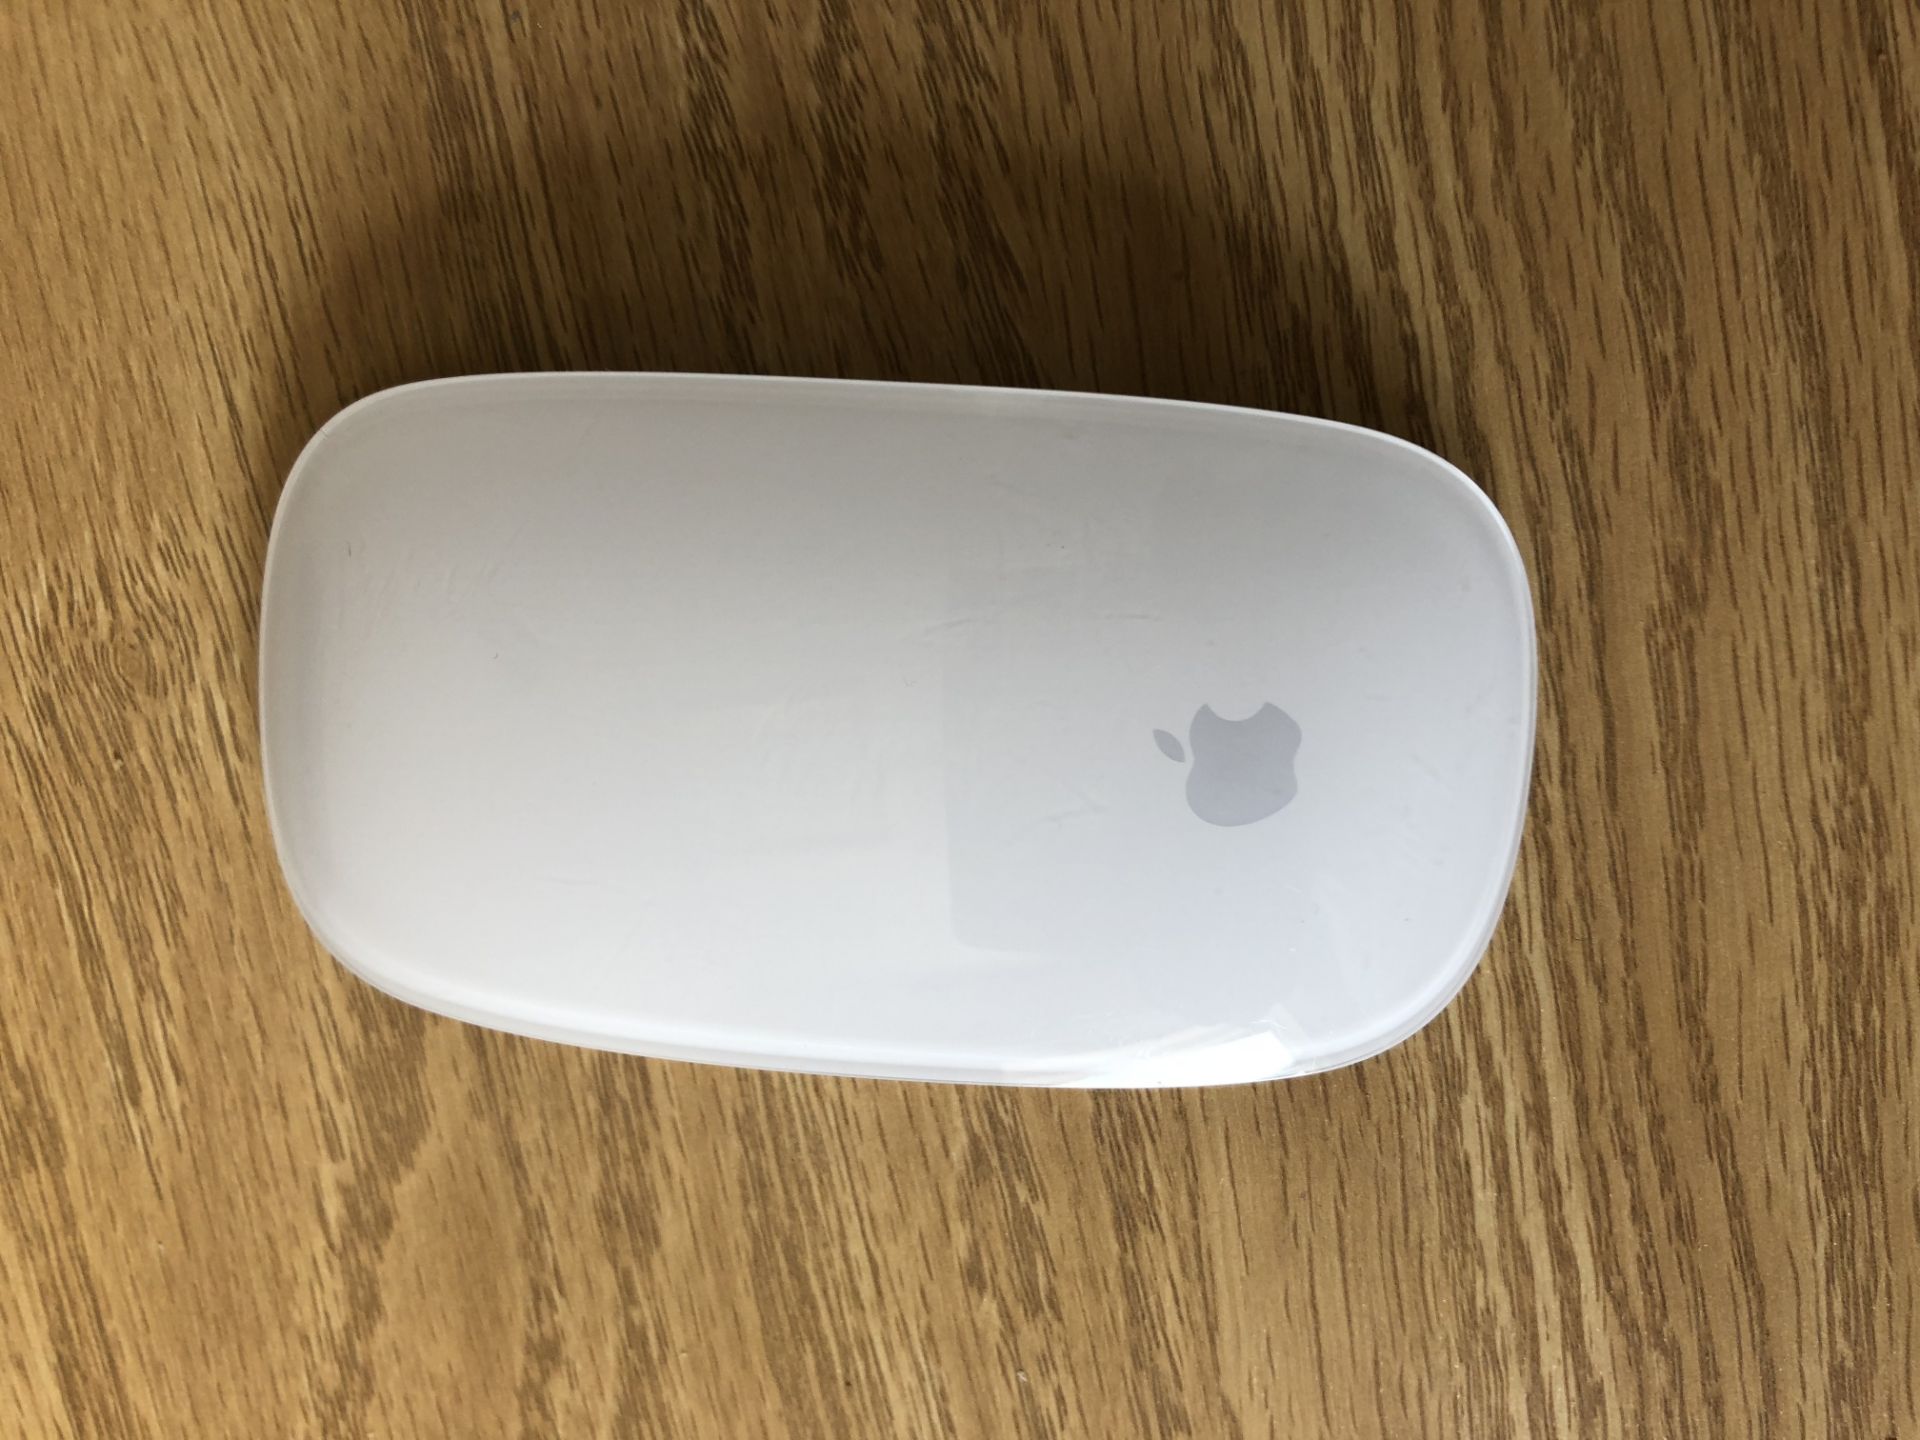 Apple Wireless Mouse, Model No. A1657 - Image 2 of 3